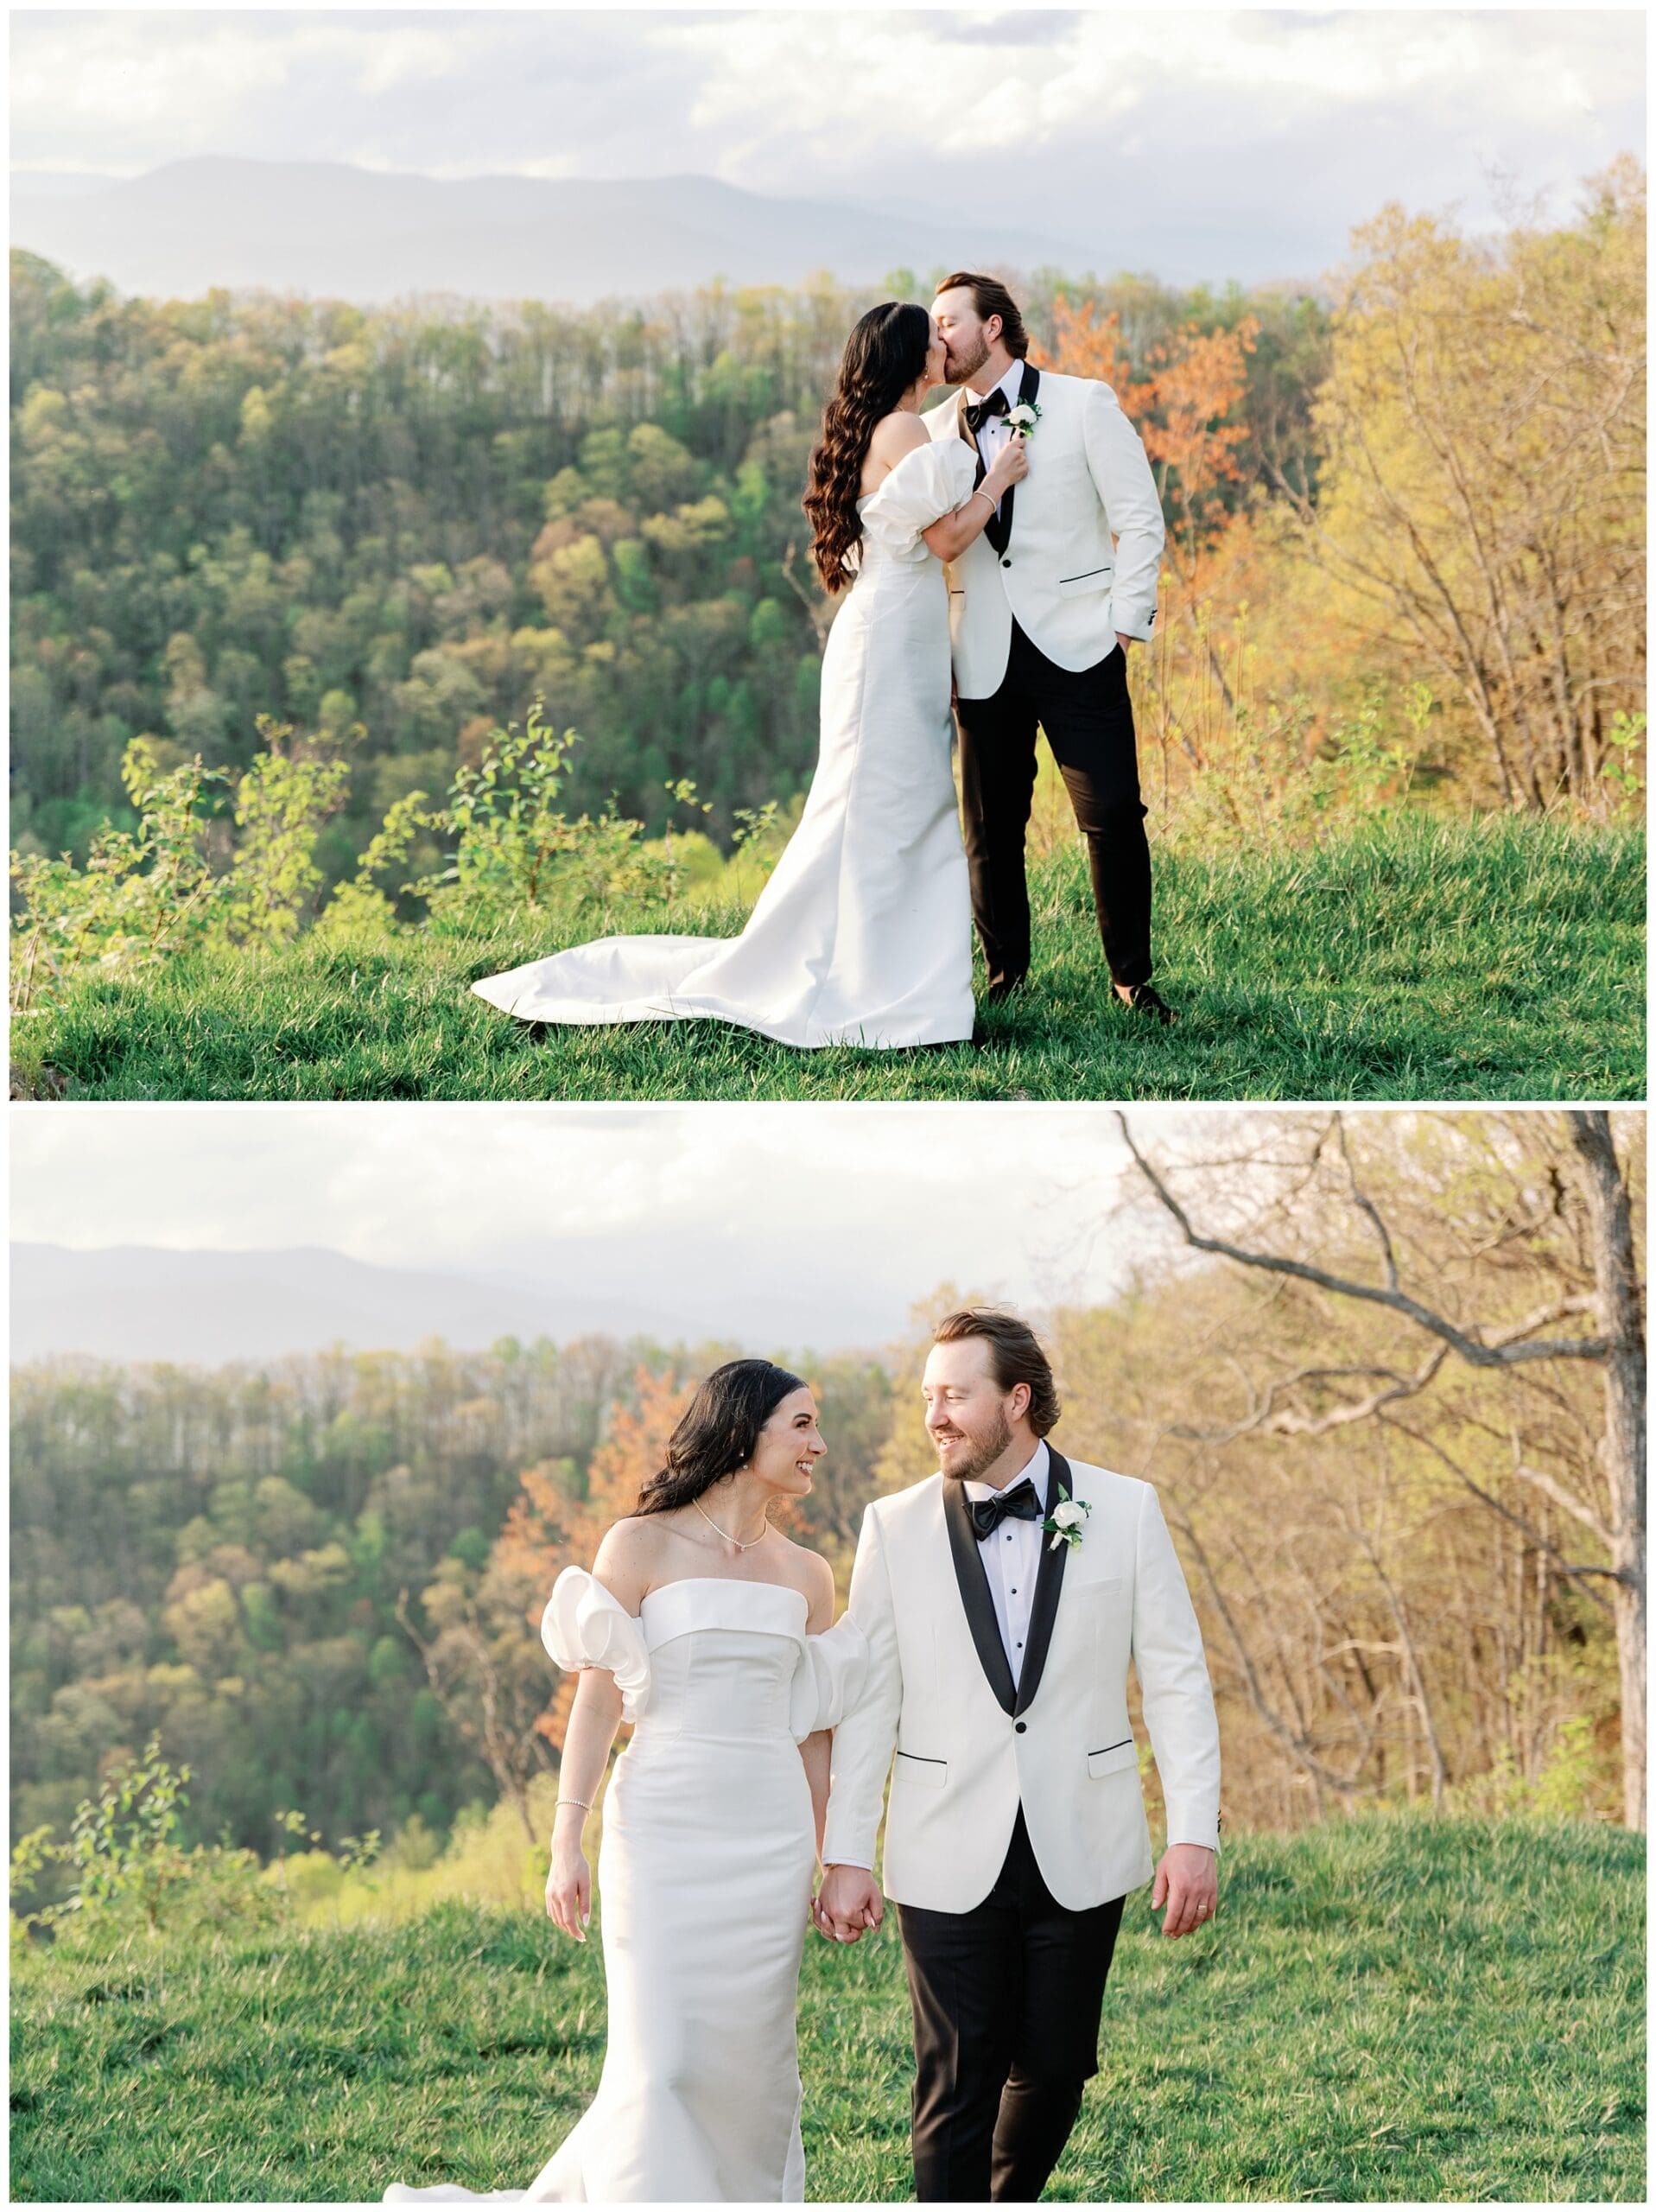 A bride and groom lovingly kiss and walk hand-in-hand in a lush meadow, with scenic mountains in the background.